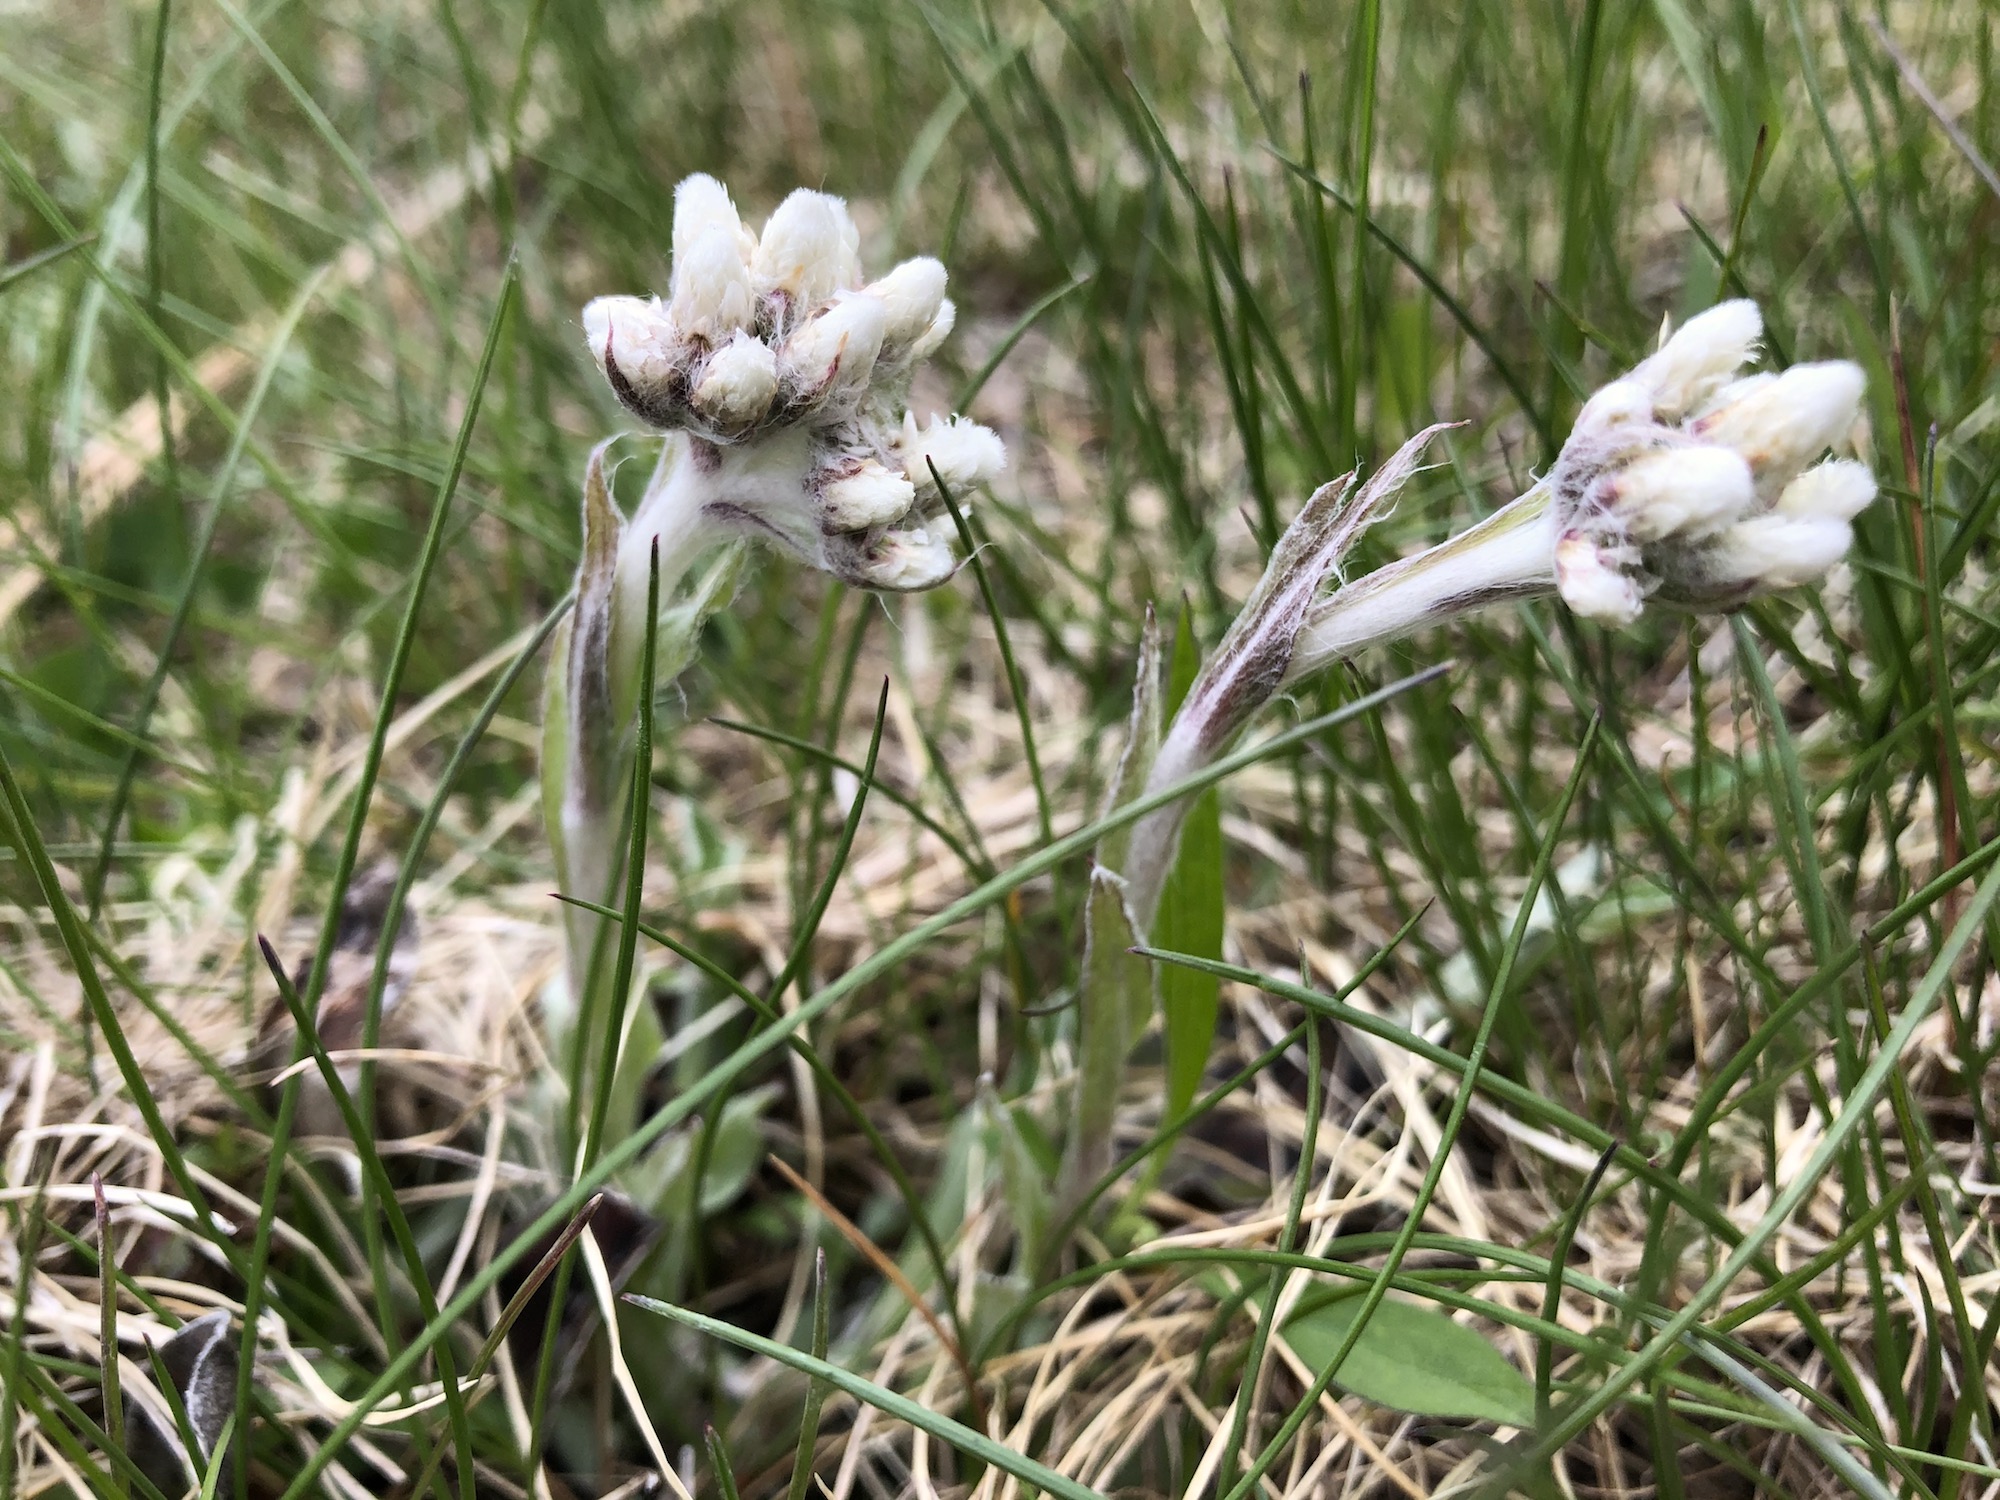 Pussytoes on Pasque Flower Hill near East Raymond Road Park in Madison, Wisconsin on April 20, 2021.